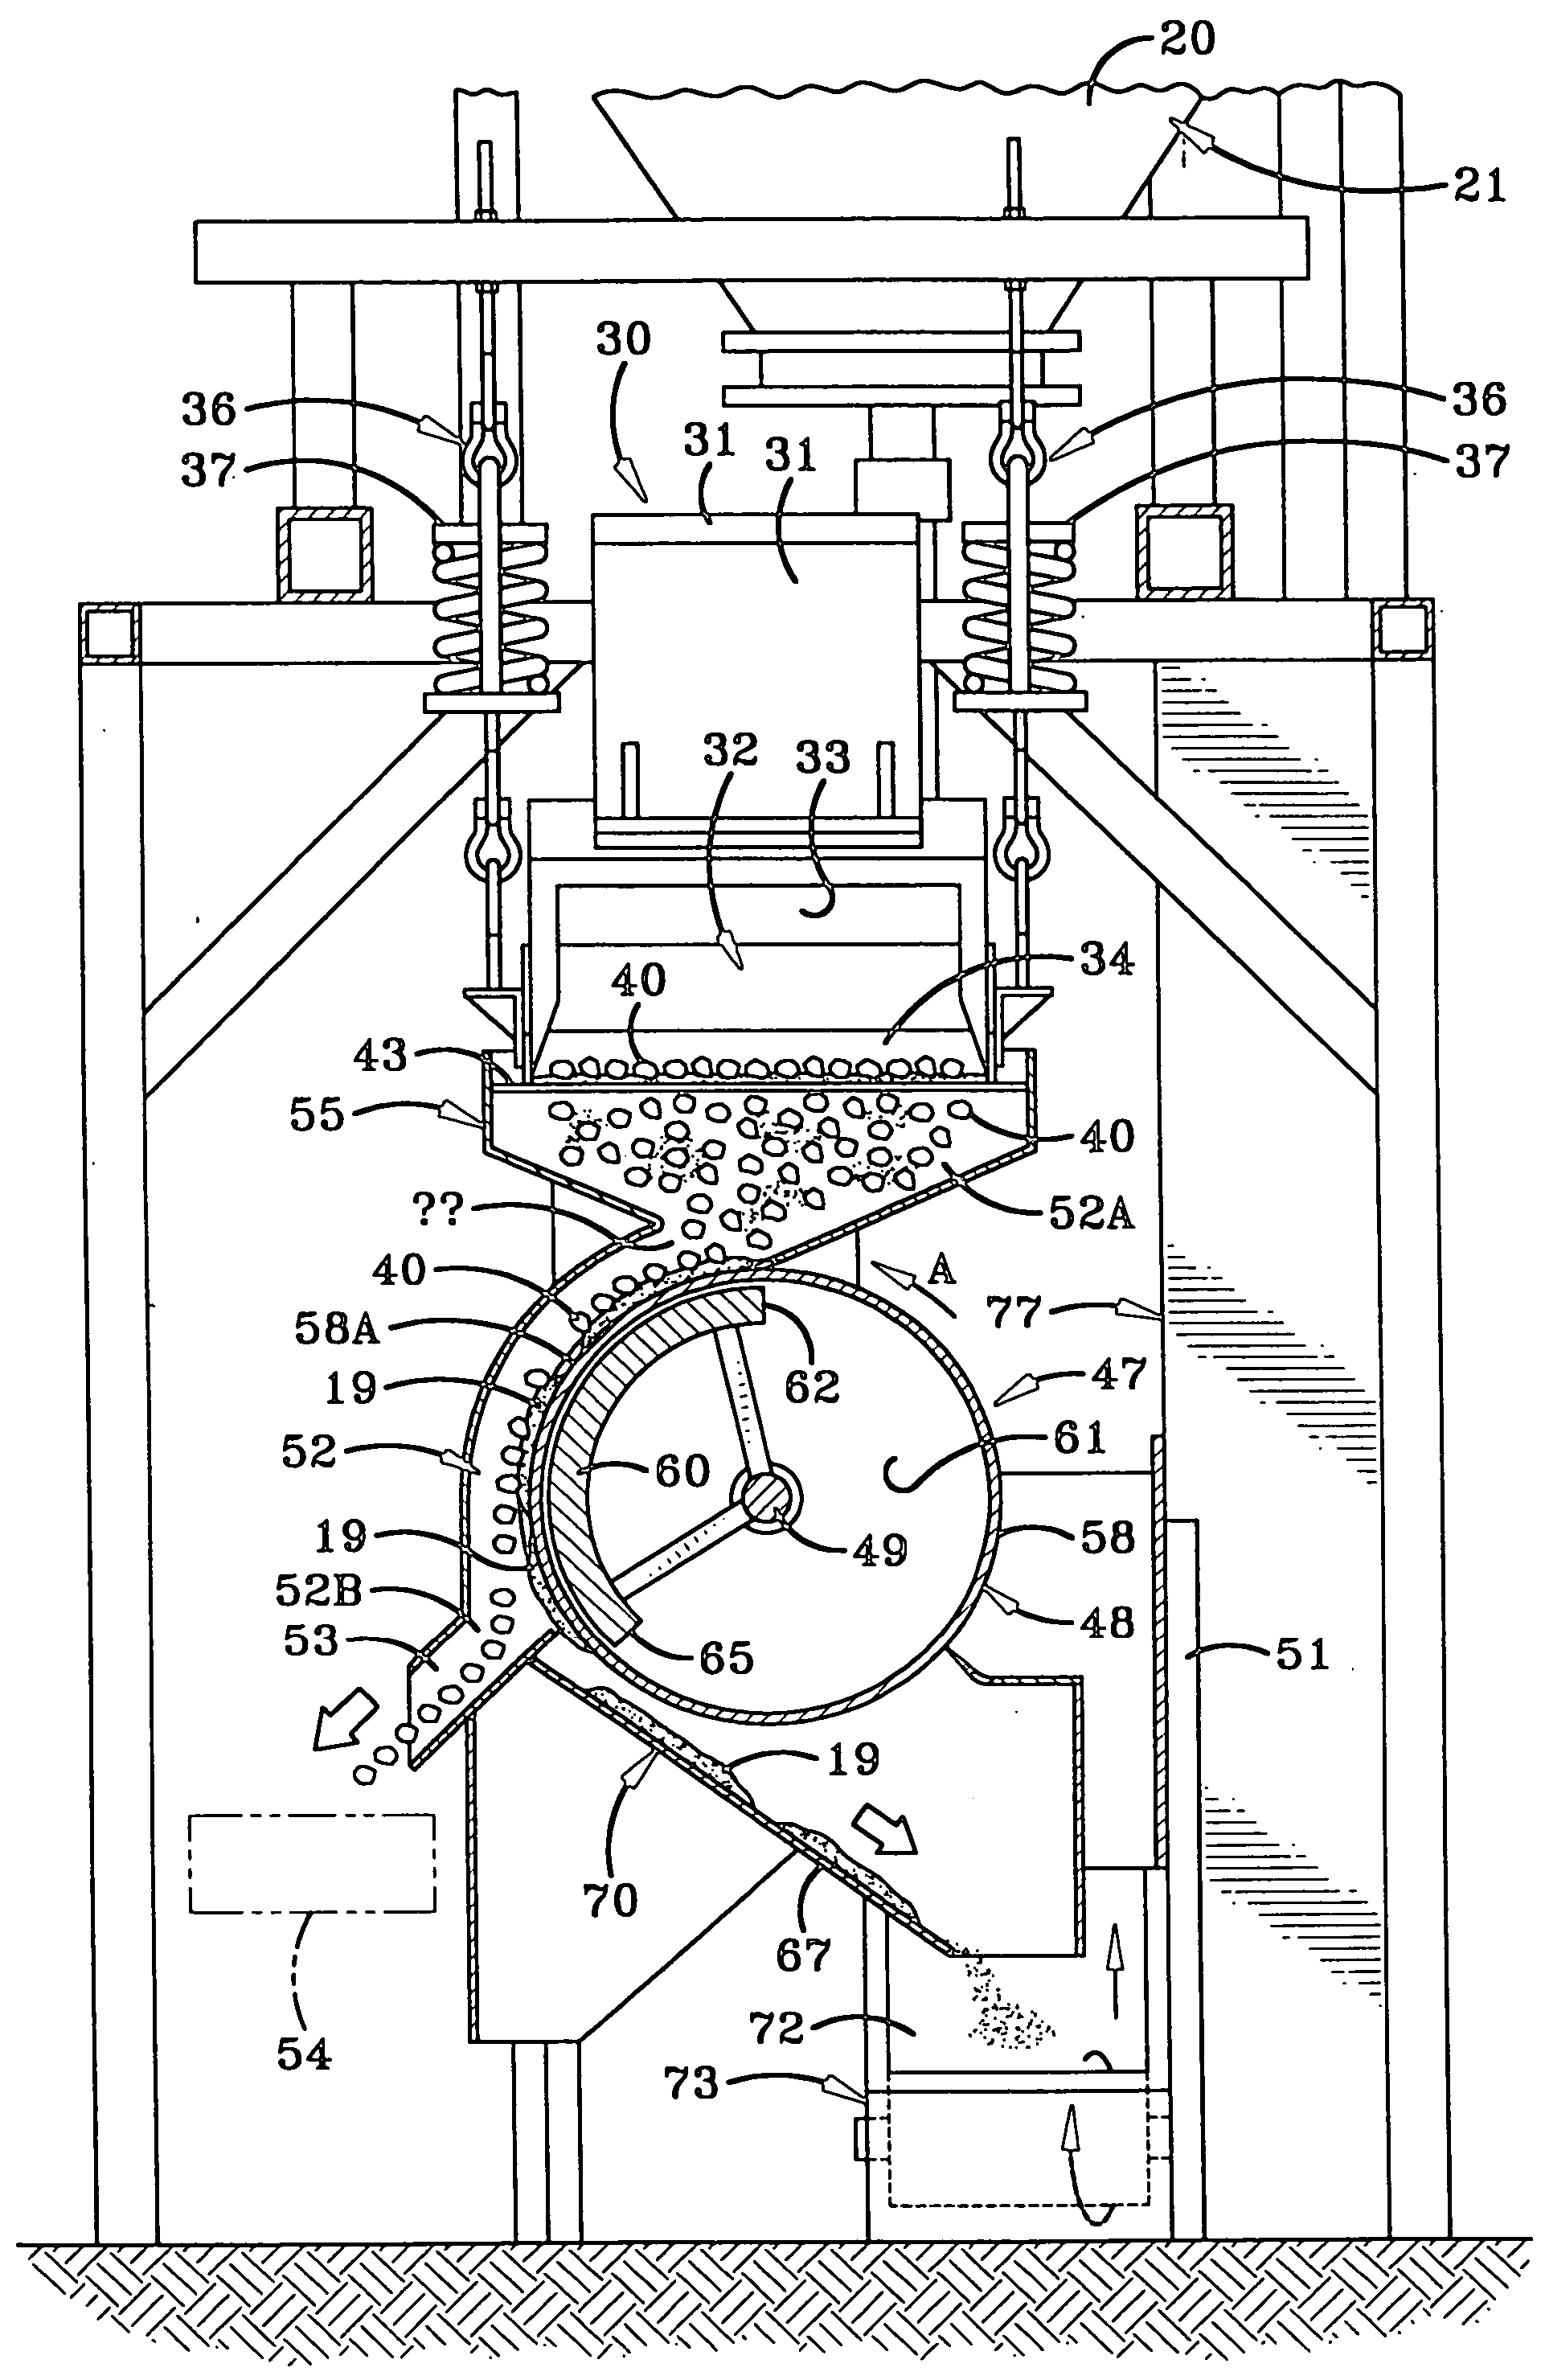 Method and apparatus for cleaning coal